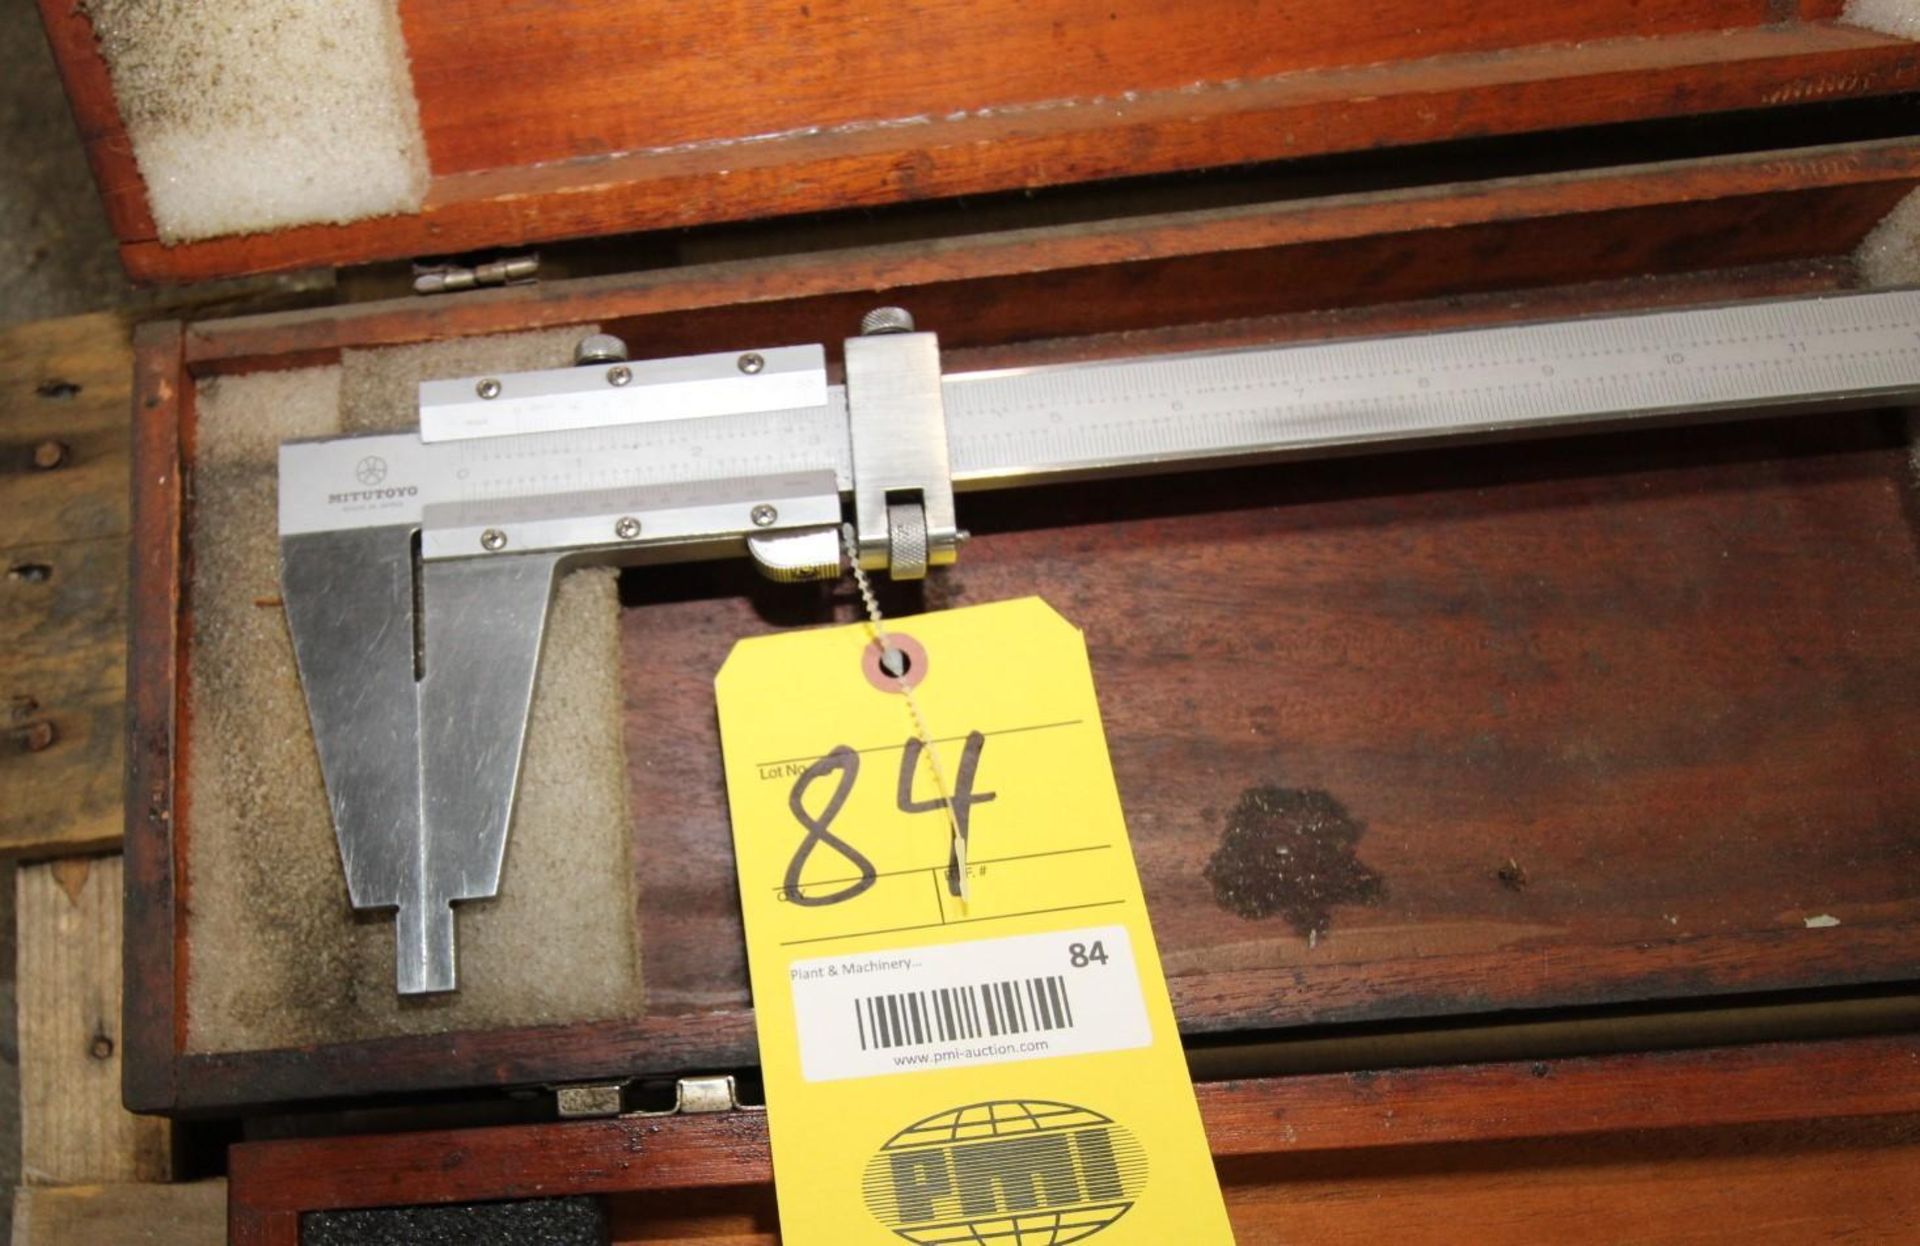 VERNIER CALIPER, MITUTOYO MDL. 160-102, 0 to 24", hardened, corrosion-resistant stainless steel - Image 2 of 2